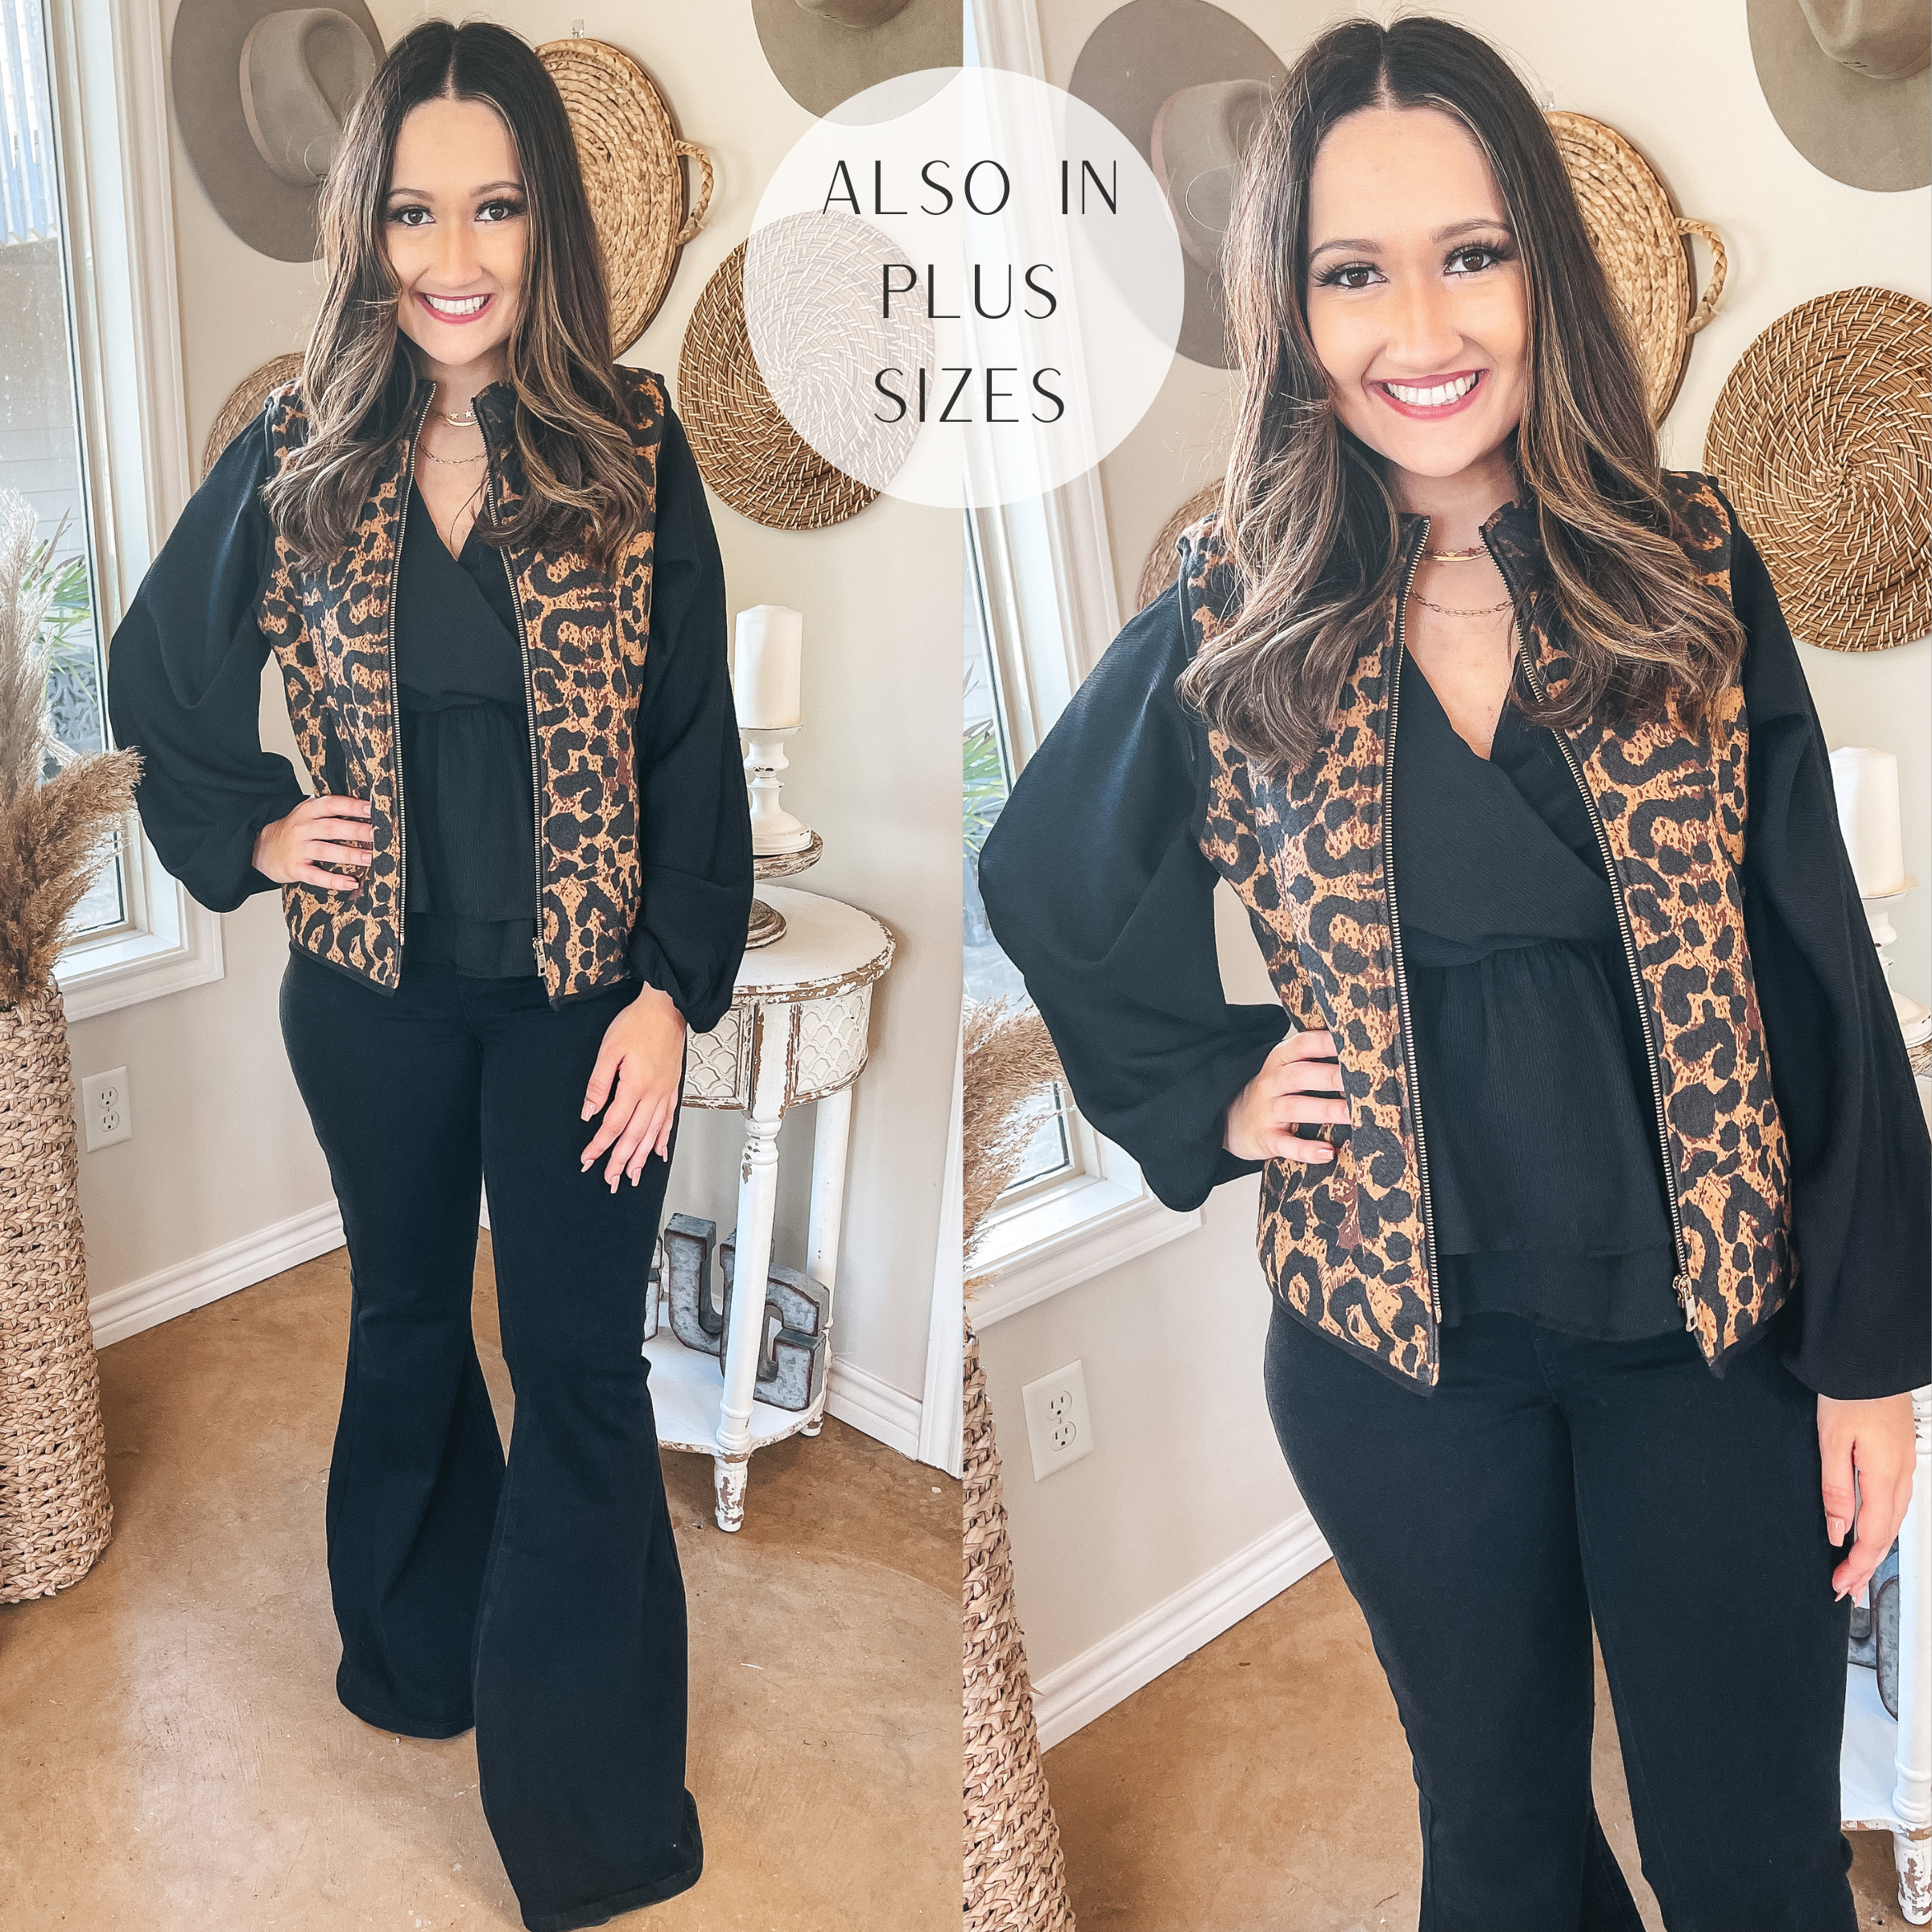 Wander Through The Aspens Quilted Zip Up Vest in Leopard - Giddy Up Glamour Boutique